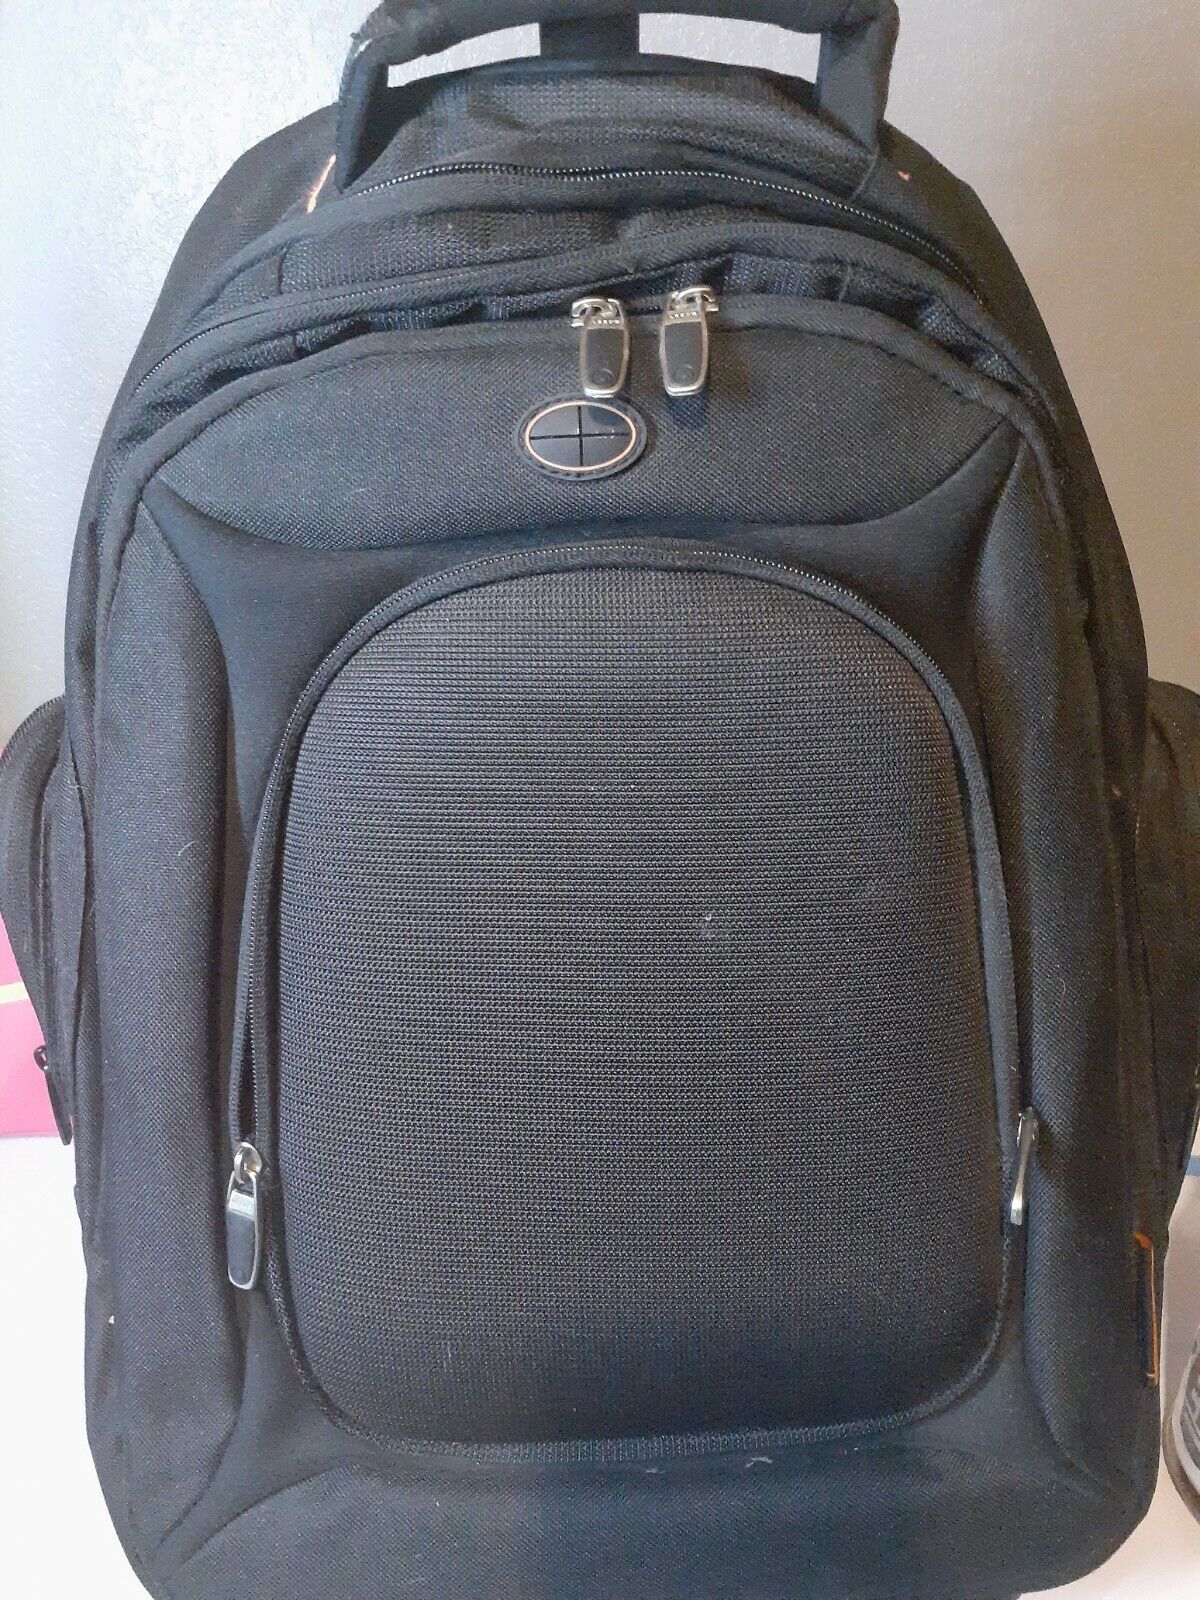 Neotec Rolling Laptop Backpack very nice condition